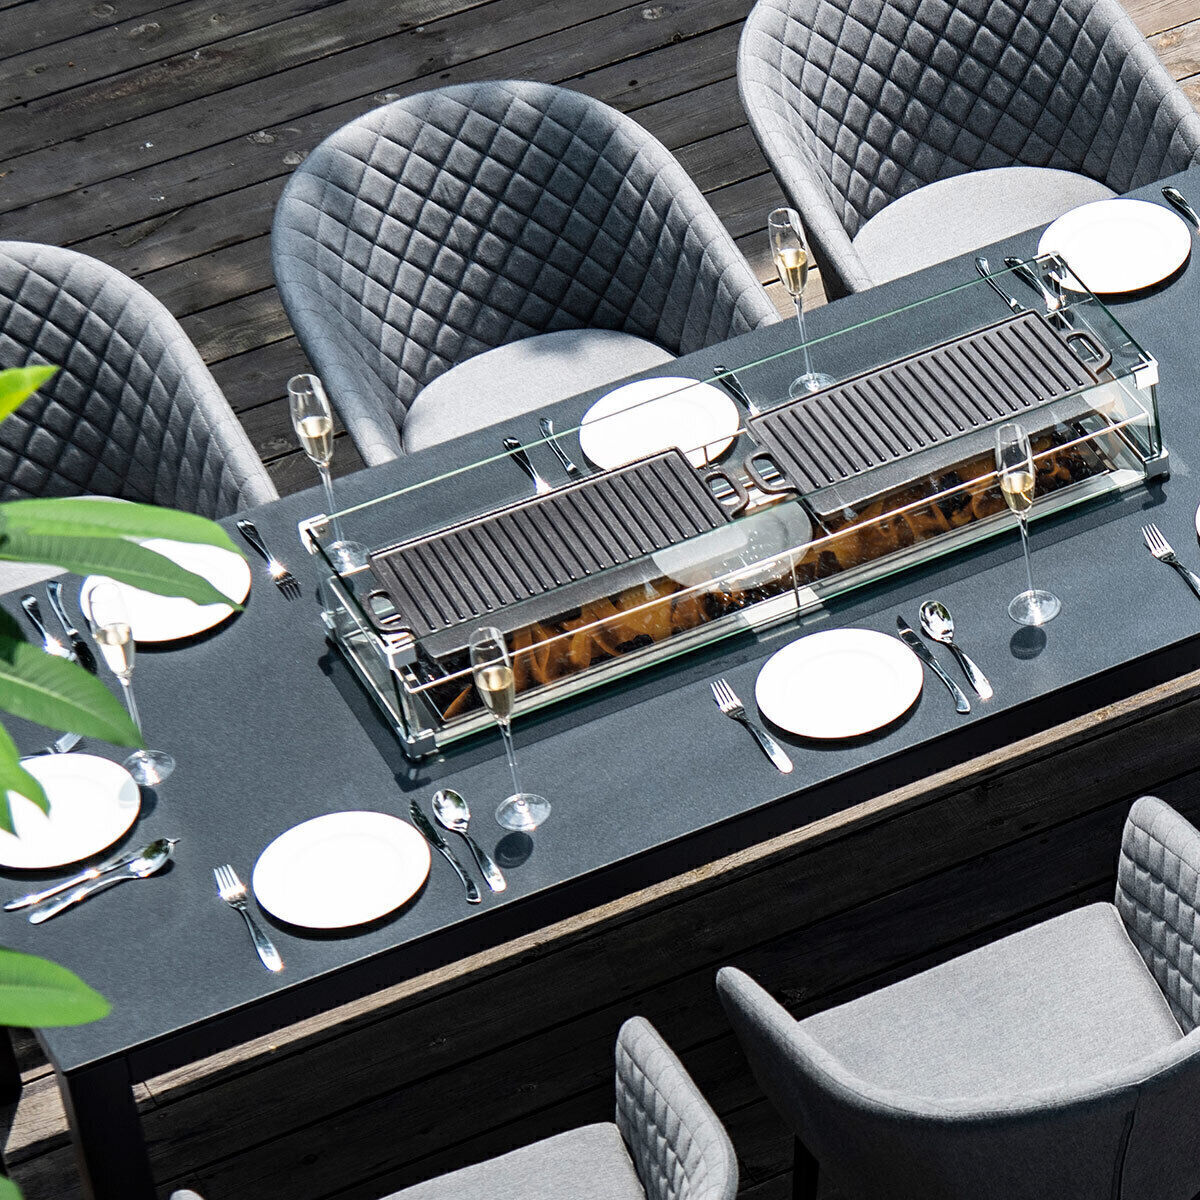 Maze - Outdoor Fabric Ambition 8 Seat Rectangular Dining Set with Fire Pit Table - Flanelle product image